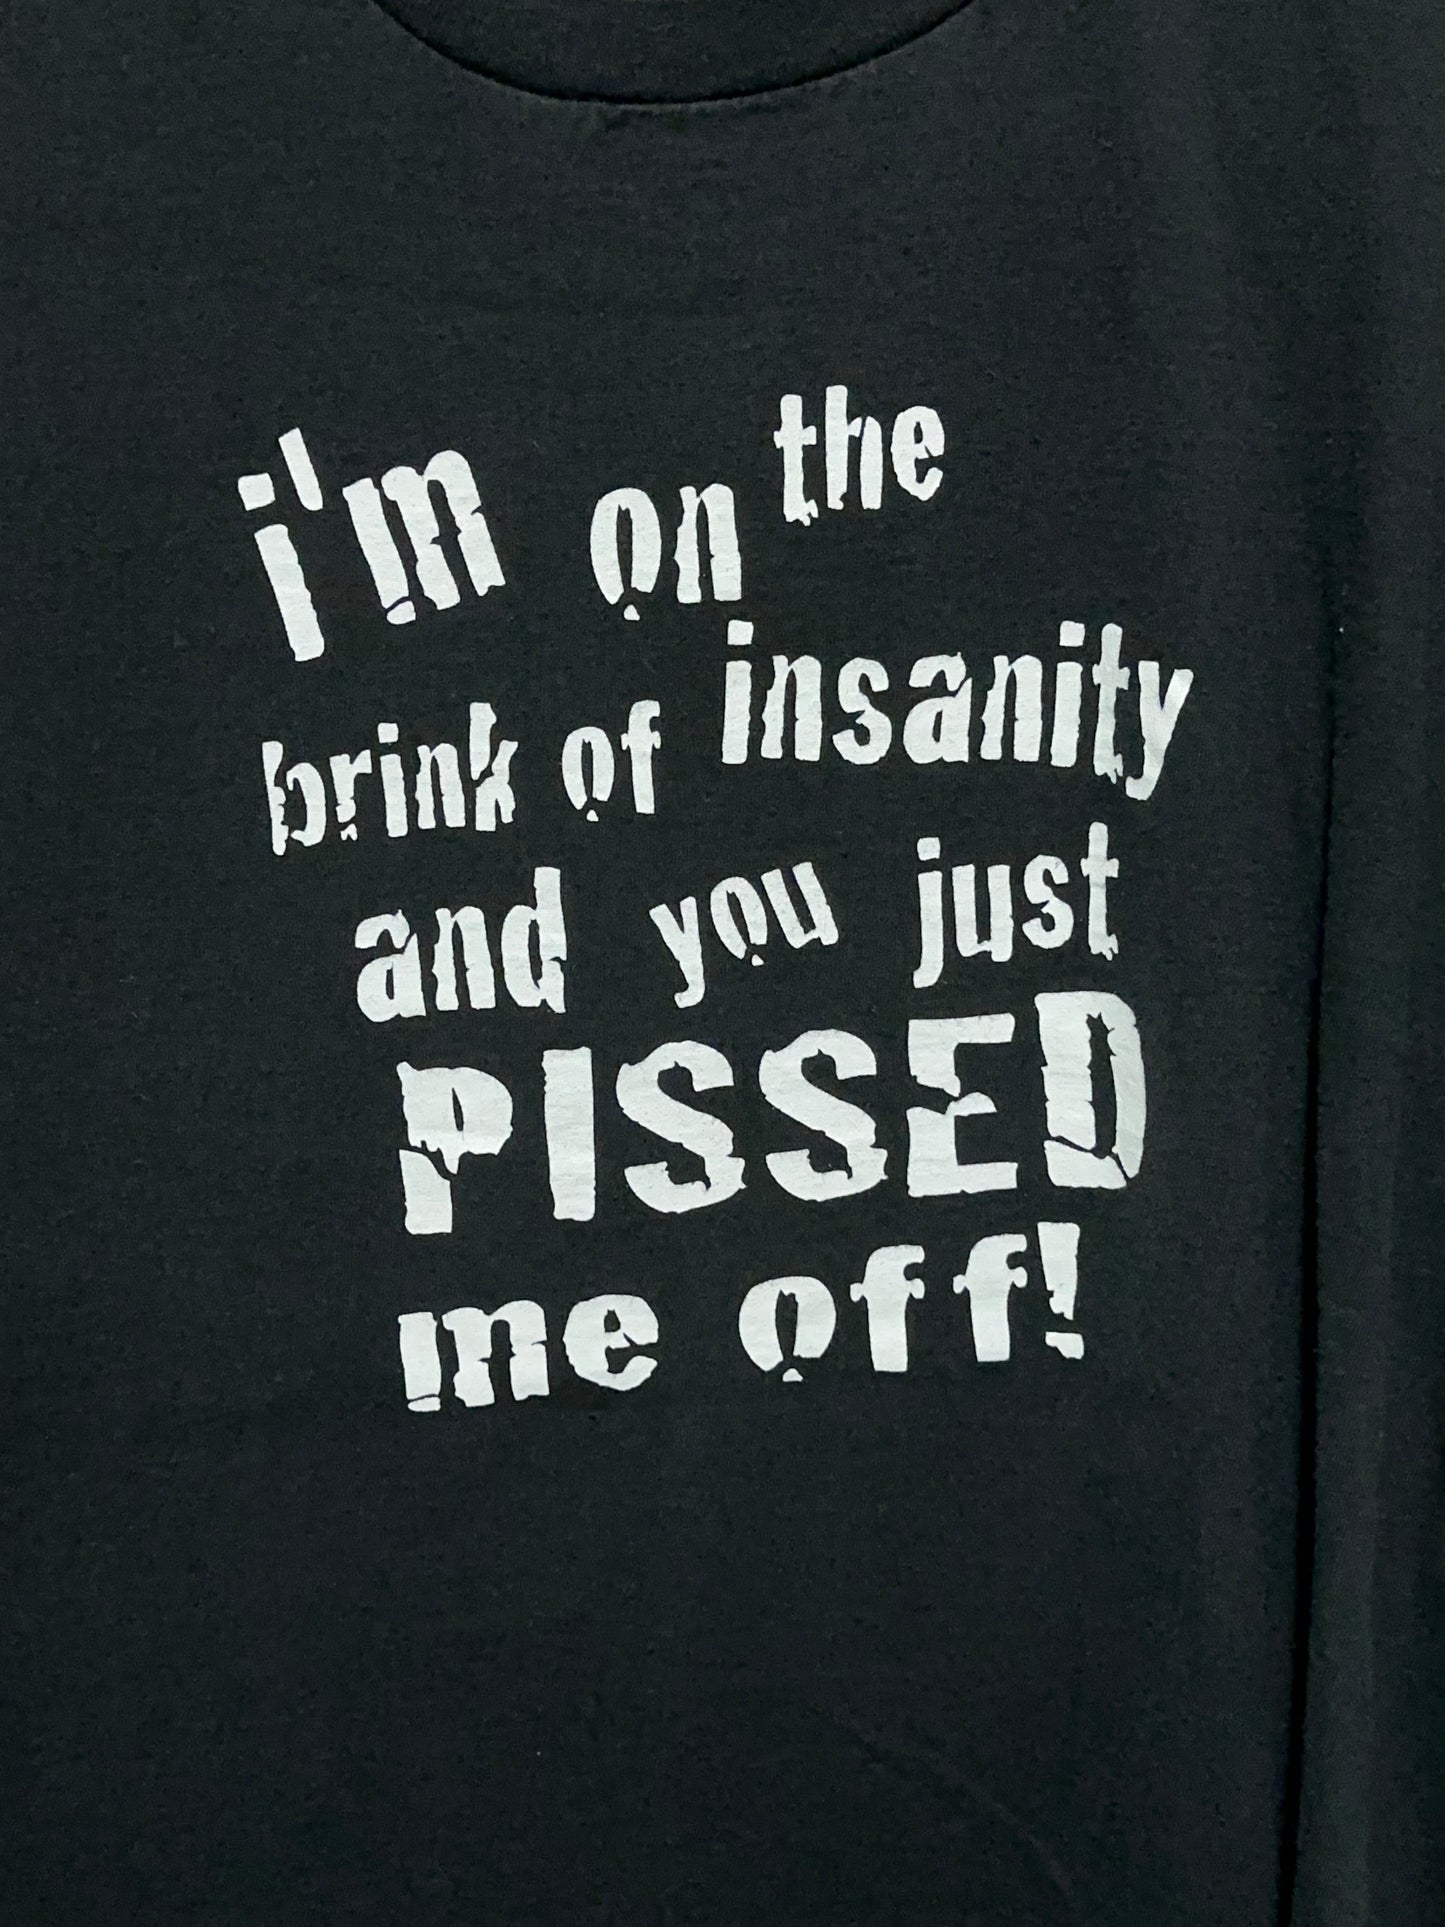 Y2K You Just Pissed Me Off Funny Adult Humor Tee XL